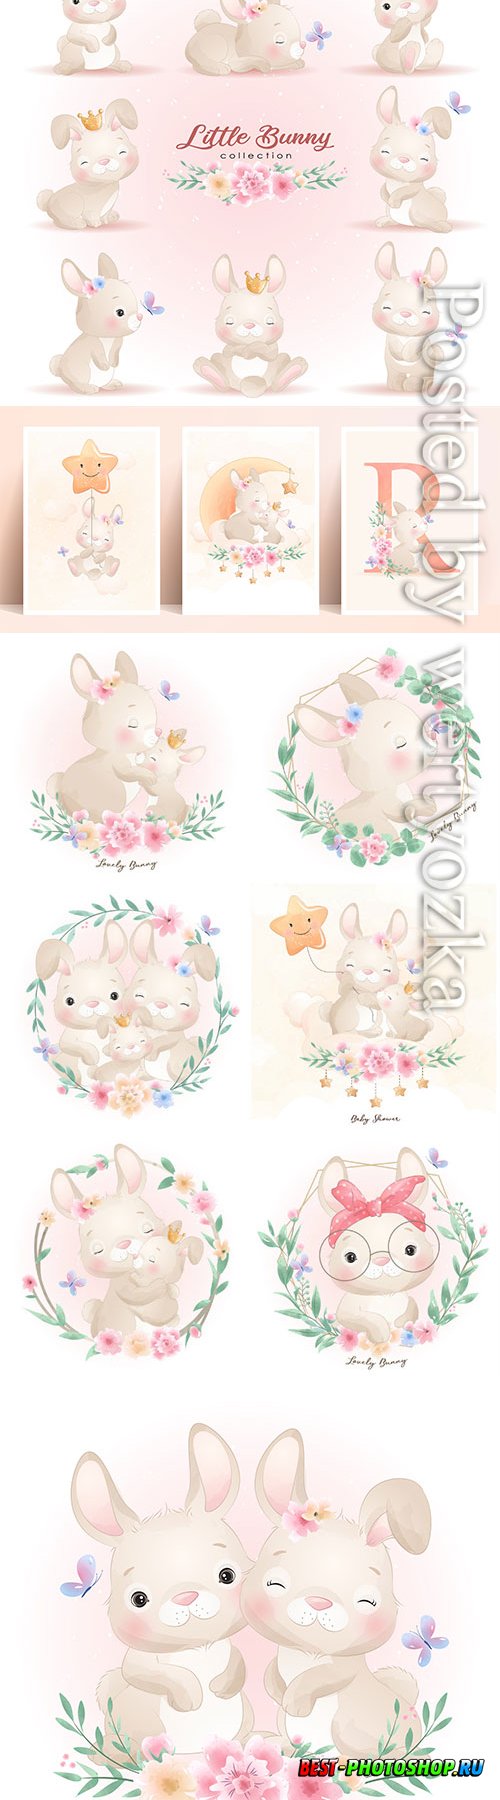 Cute doodle bunny poses with floral illustration premium vector